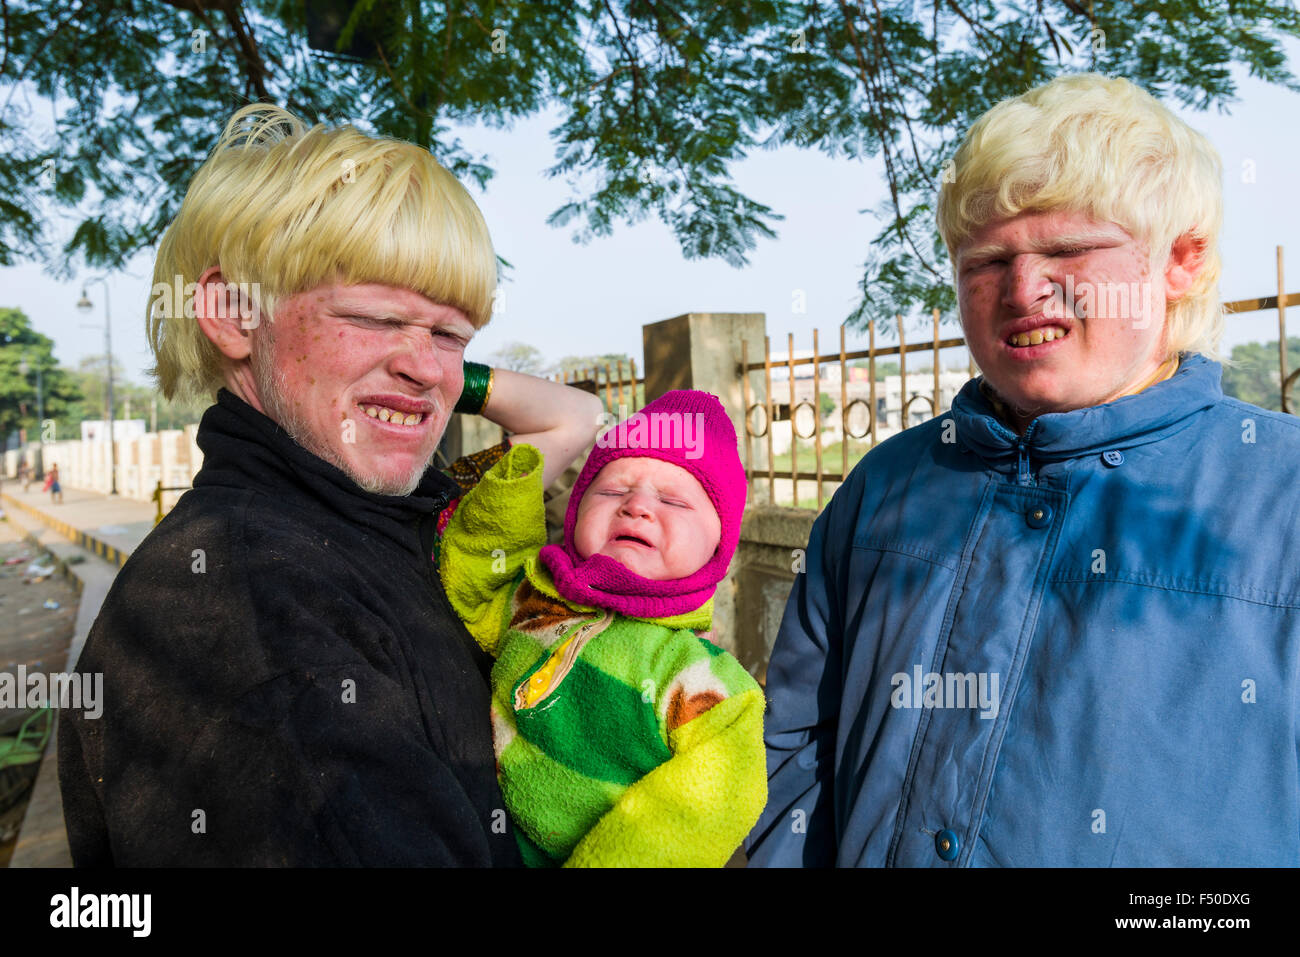 Portraits of Albinos with extremely pale skin and near-white hair, covering their eyes from the sunlight Stock Photo